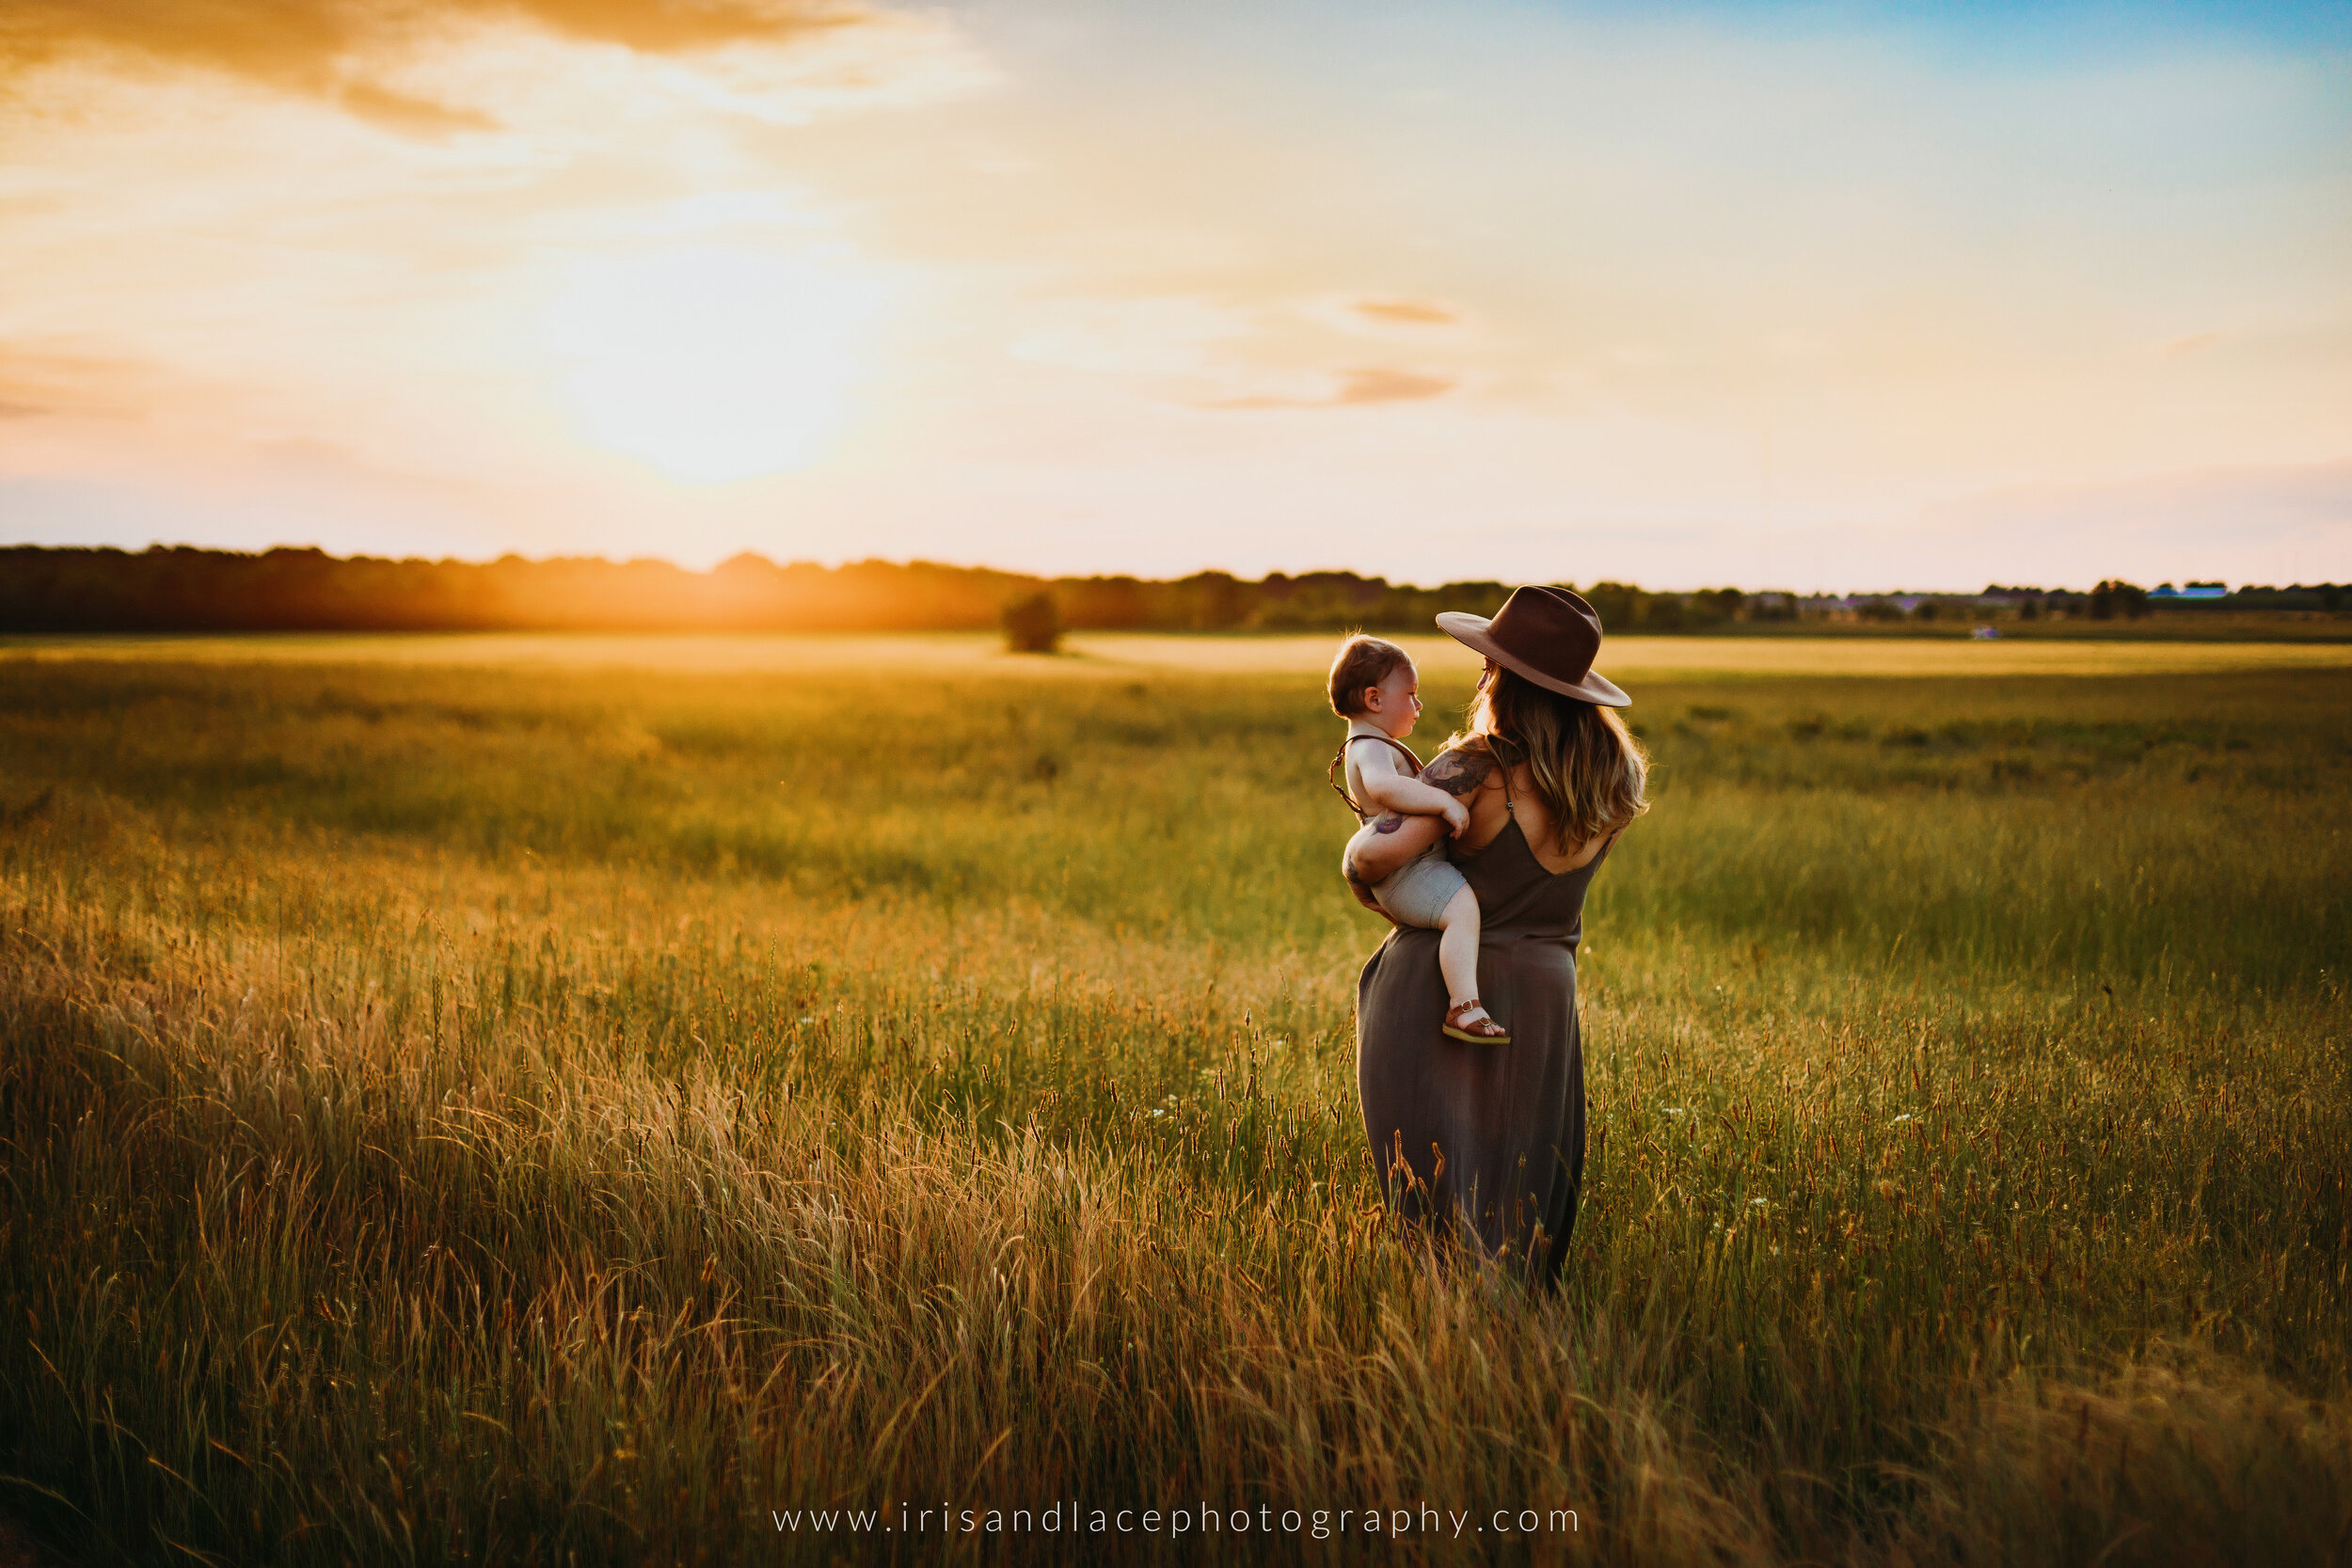 Mountain View Family Photographer | Iris and Lace Photography